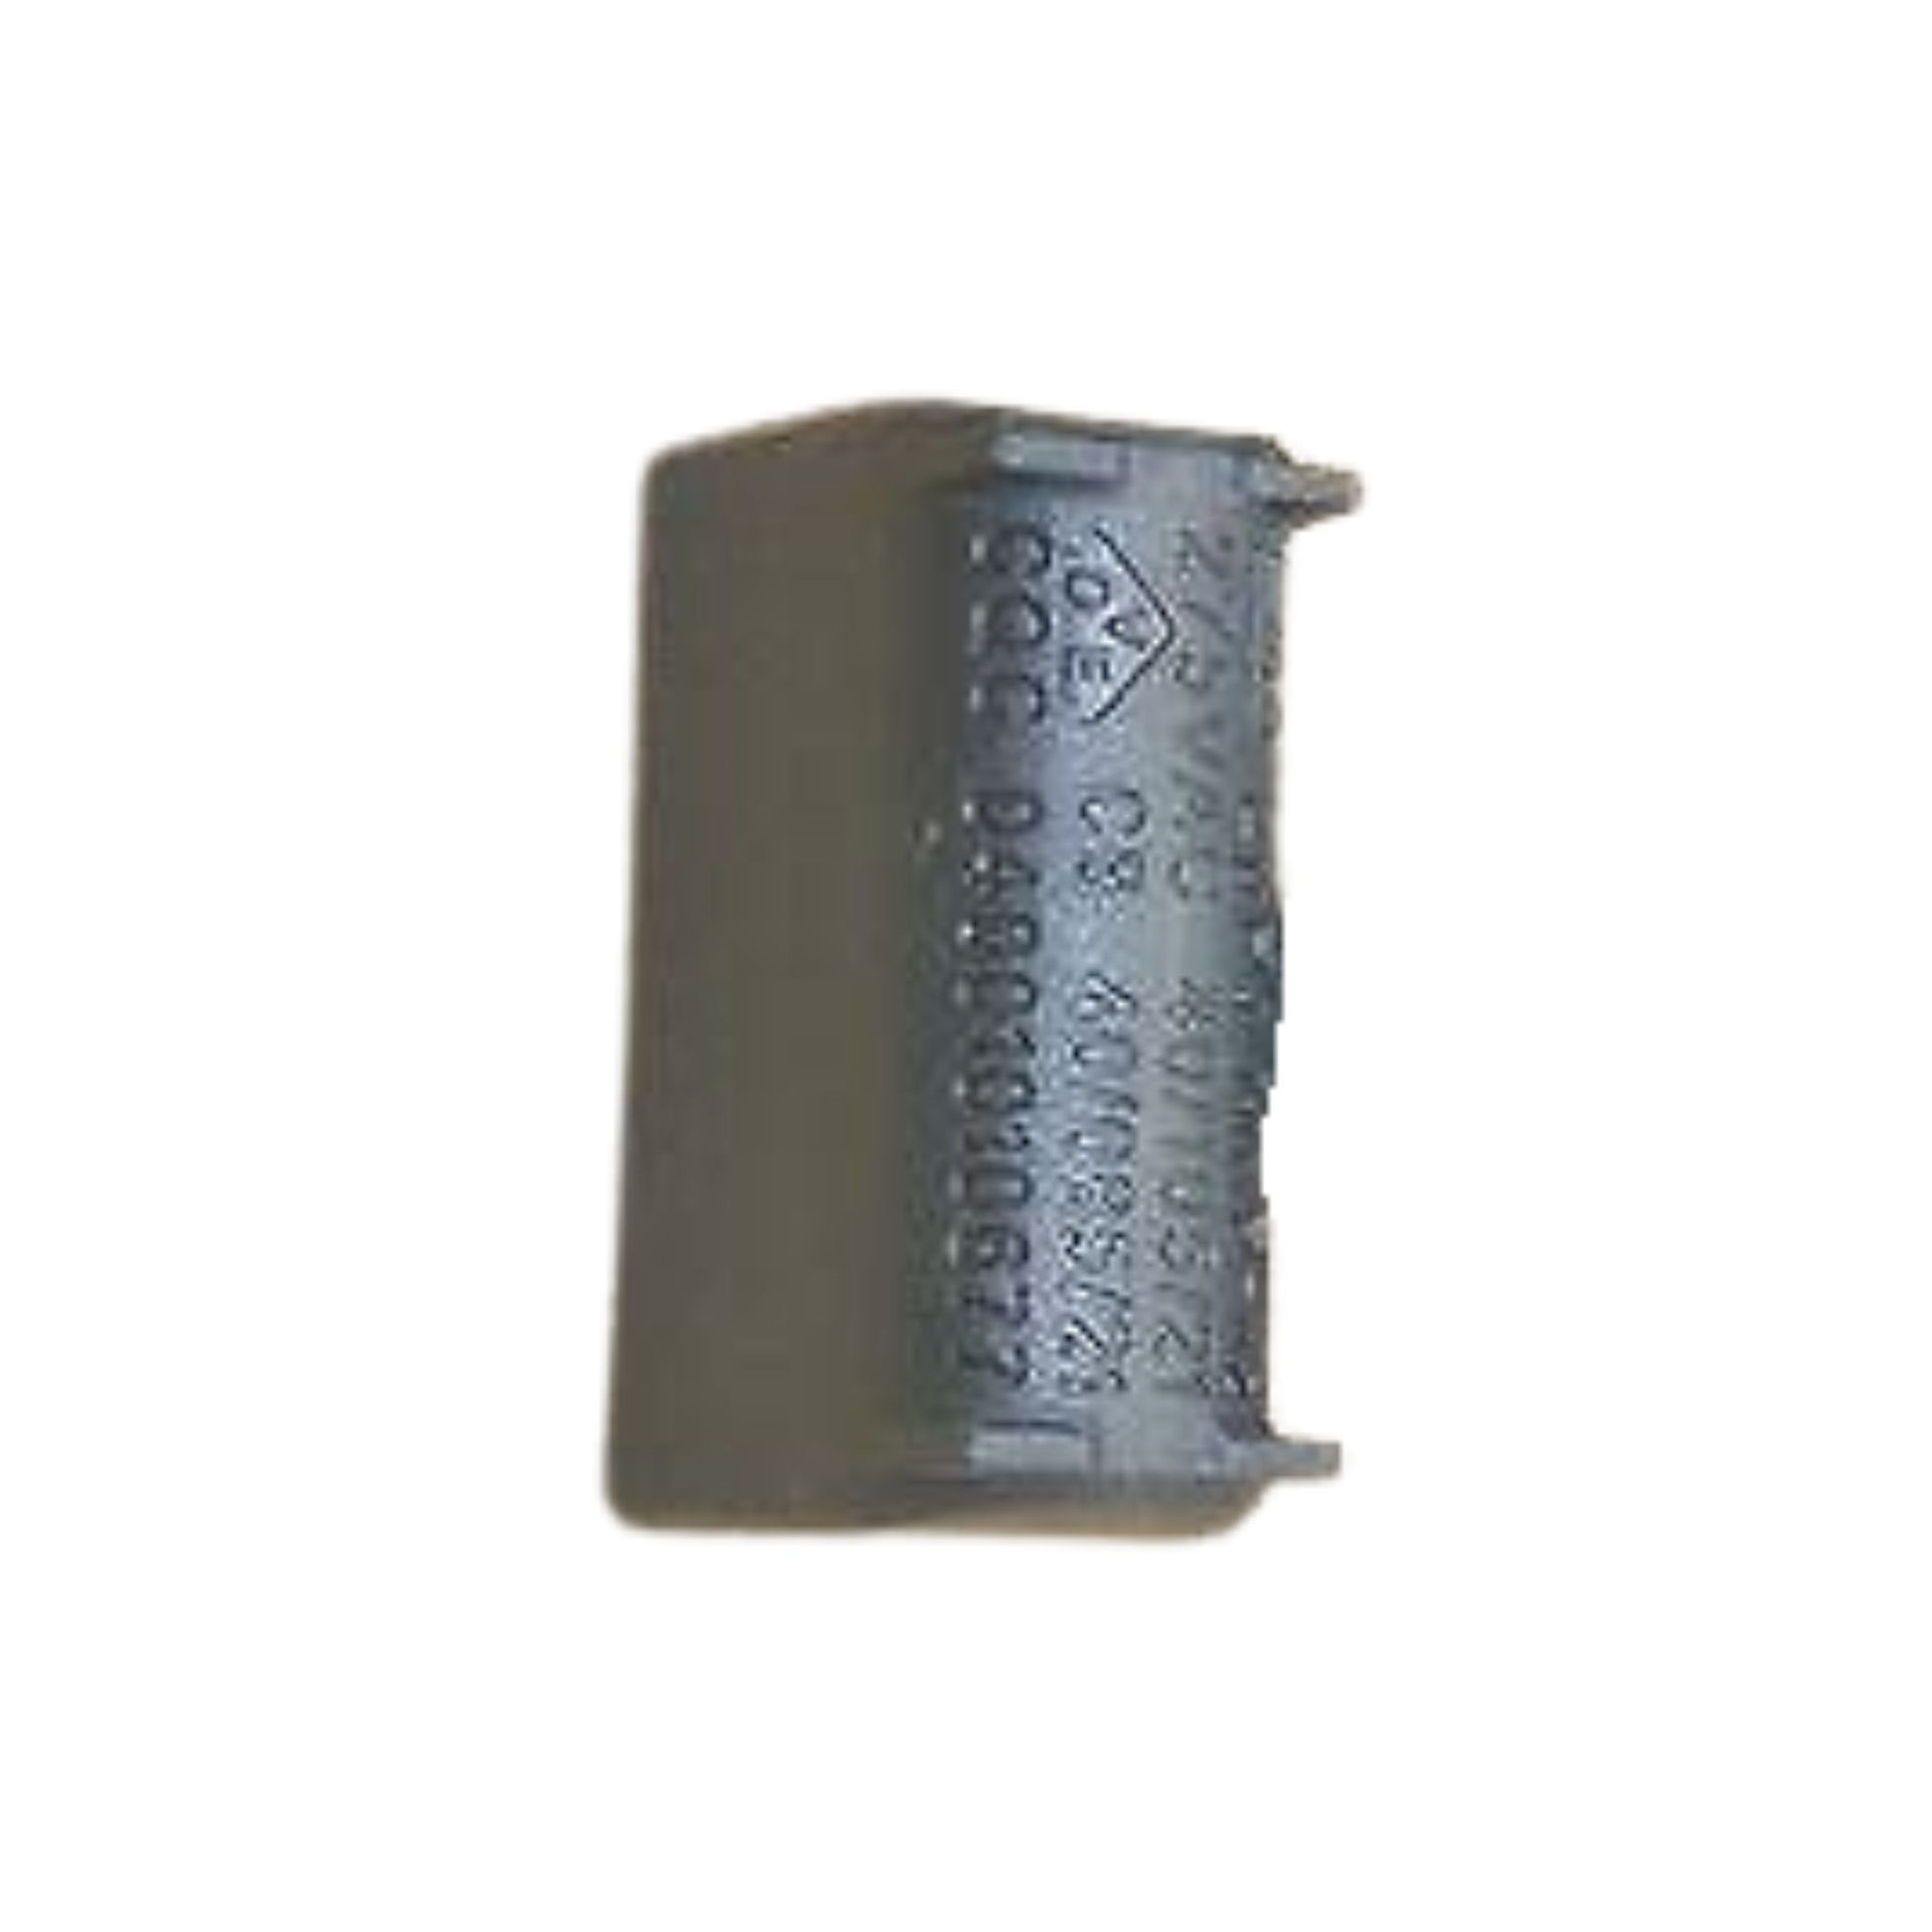 2 µF J MKP-X2 275Vac Capacitor suitable for Induction Stove - Faritha